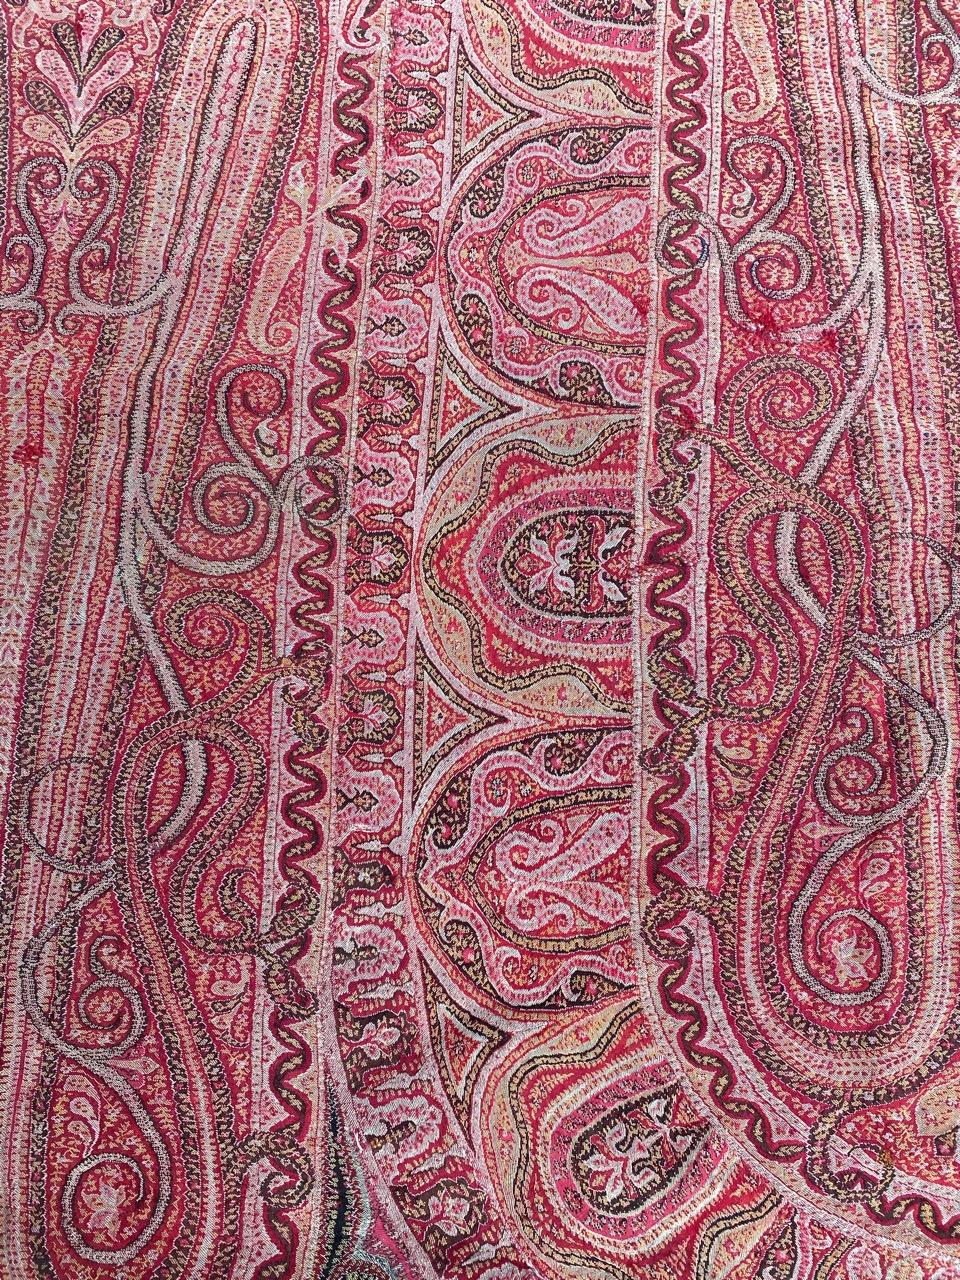 Late 19th century Indian Kashmir shawl fragment with beautiful floral design and beautiful natural colors, entirely hand embroidered with silk and wool.